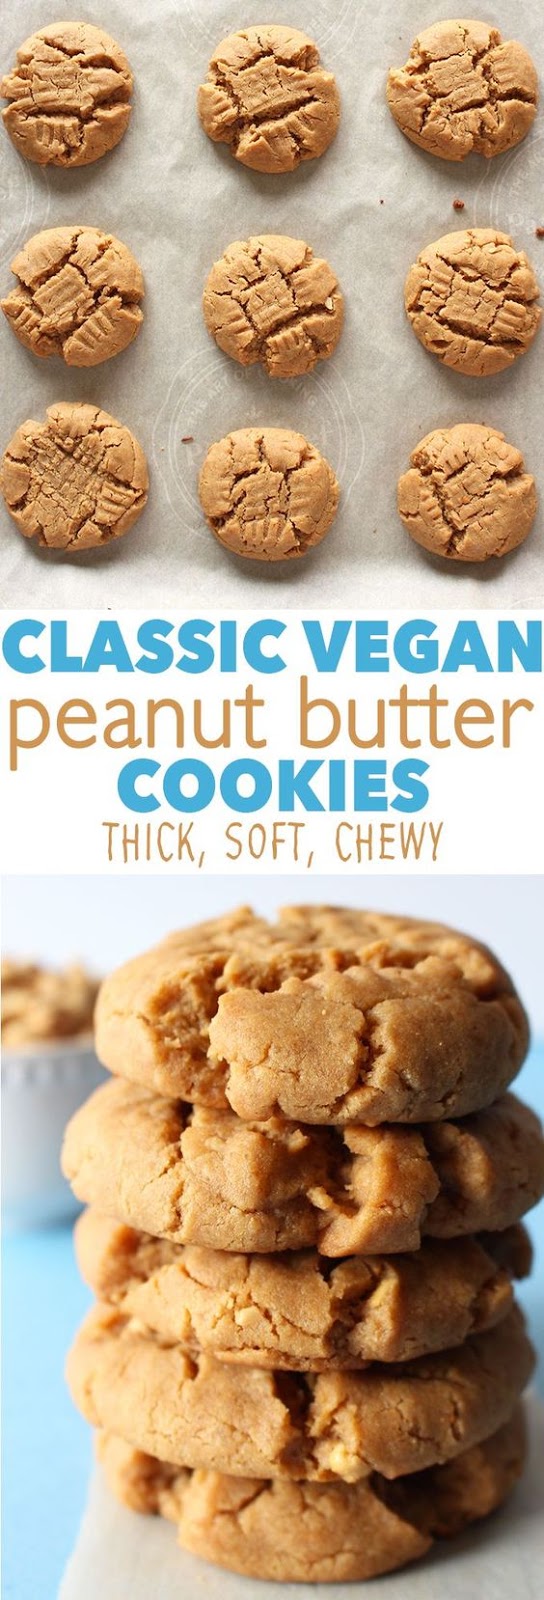 Thick, chewy, classic peanut butter cookies, in vegan form! These cookies have so much peanut-y flavour, you’d never be able to tell they’re vegan!